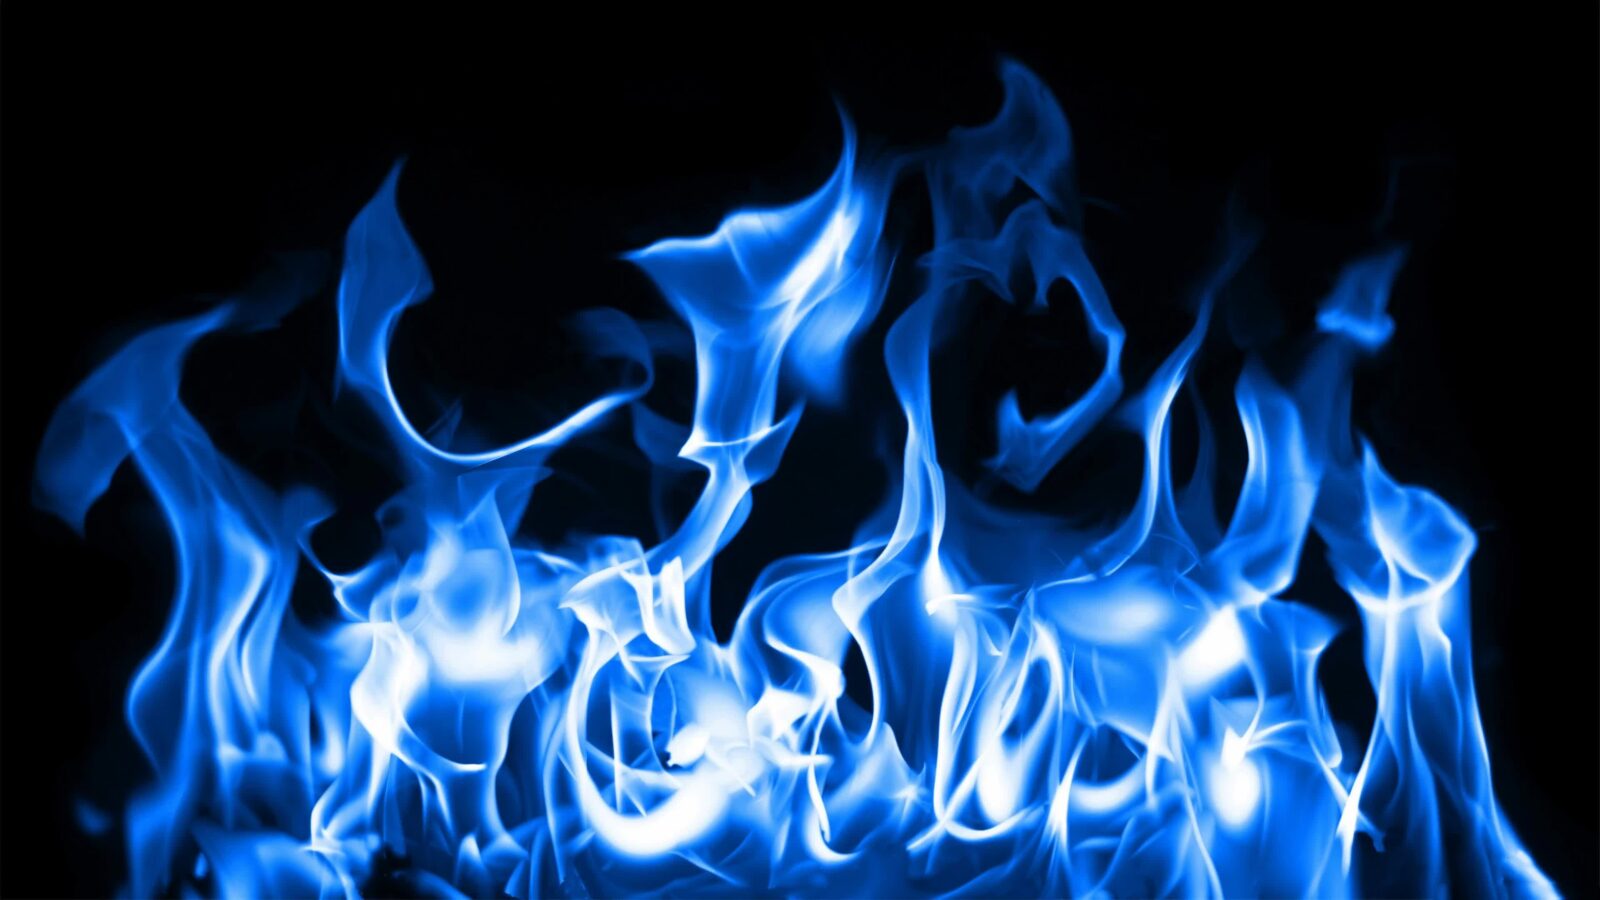 Blue Fire Abstract Flame 4K - Animated Desktop Background